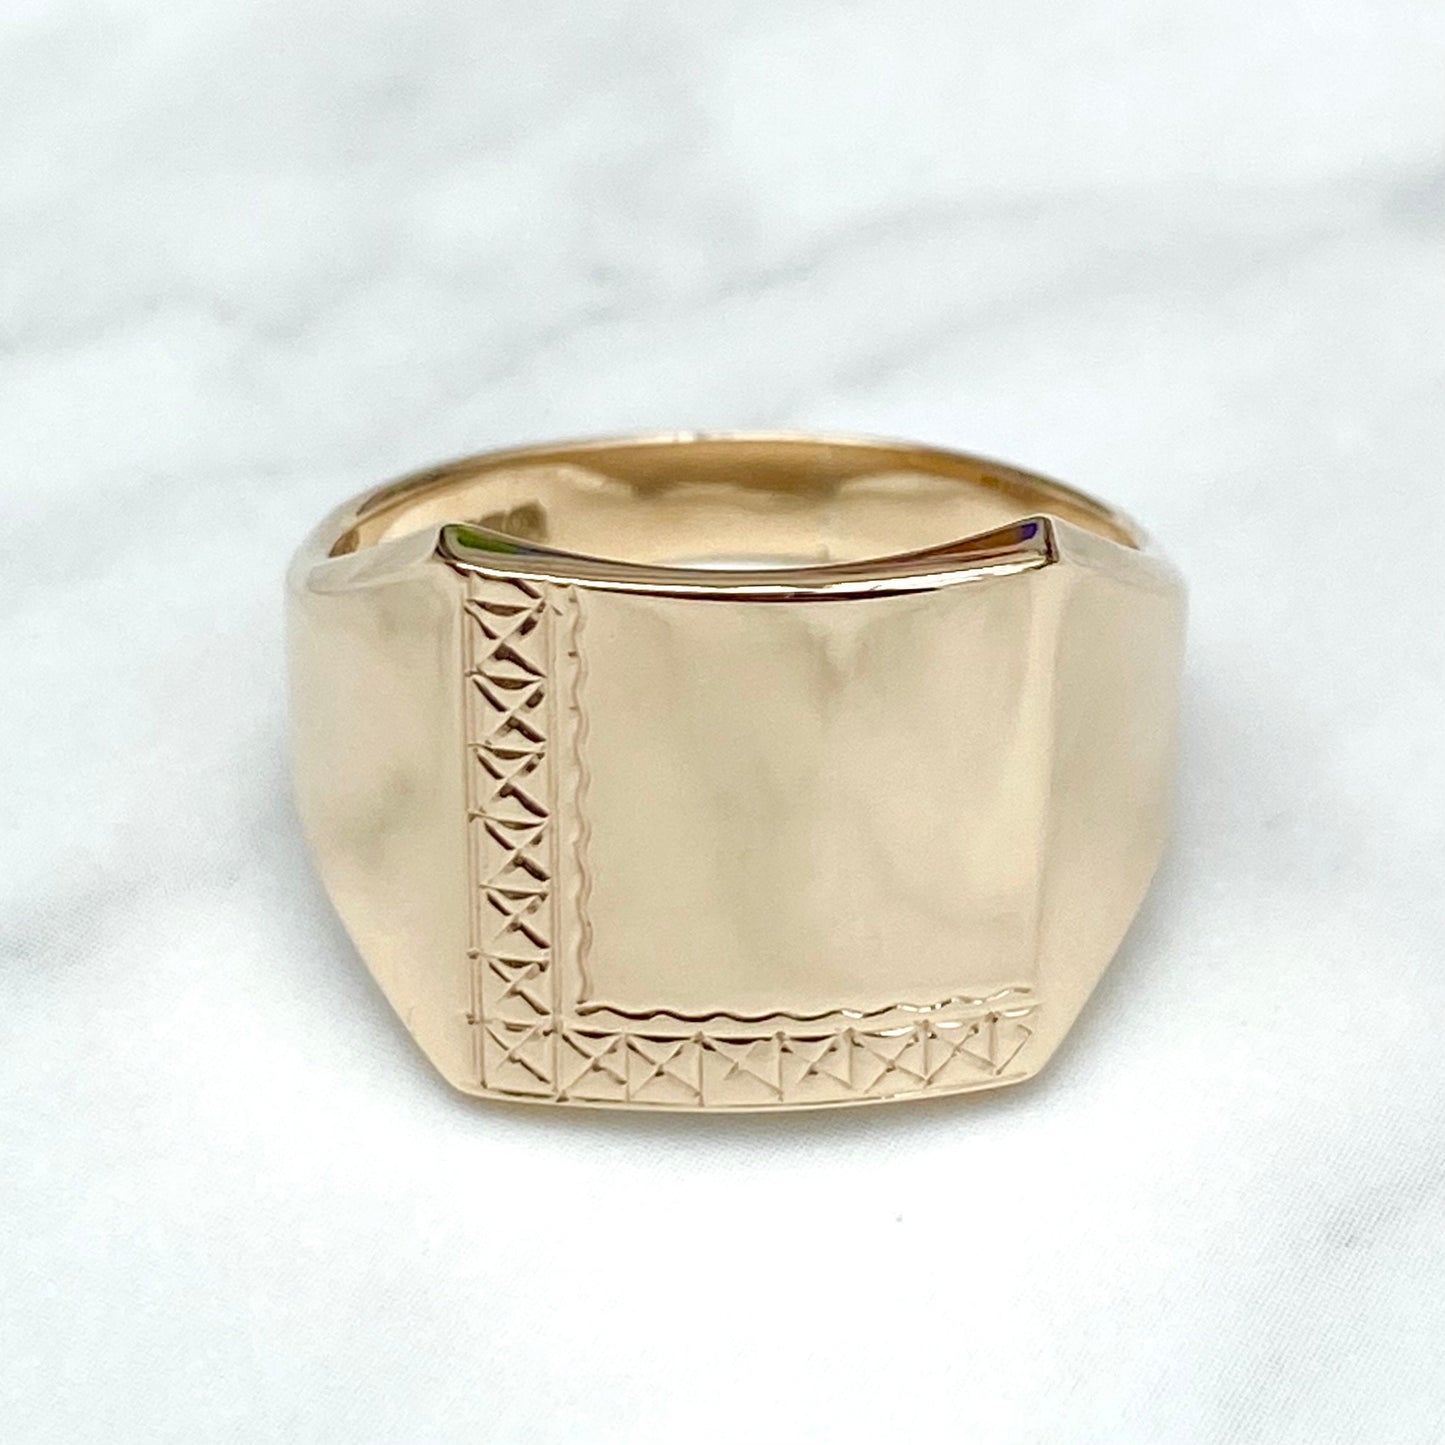 Vintage 9ct yellow gold large square signet ring - Can be hand engraved - UK size U - US size 10 - British vintage jewellery